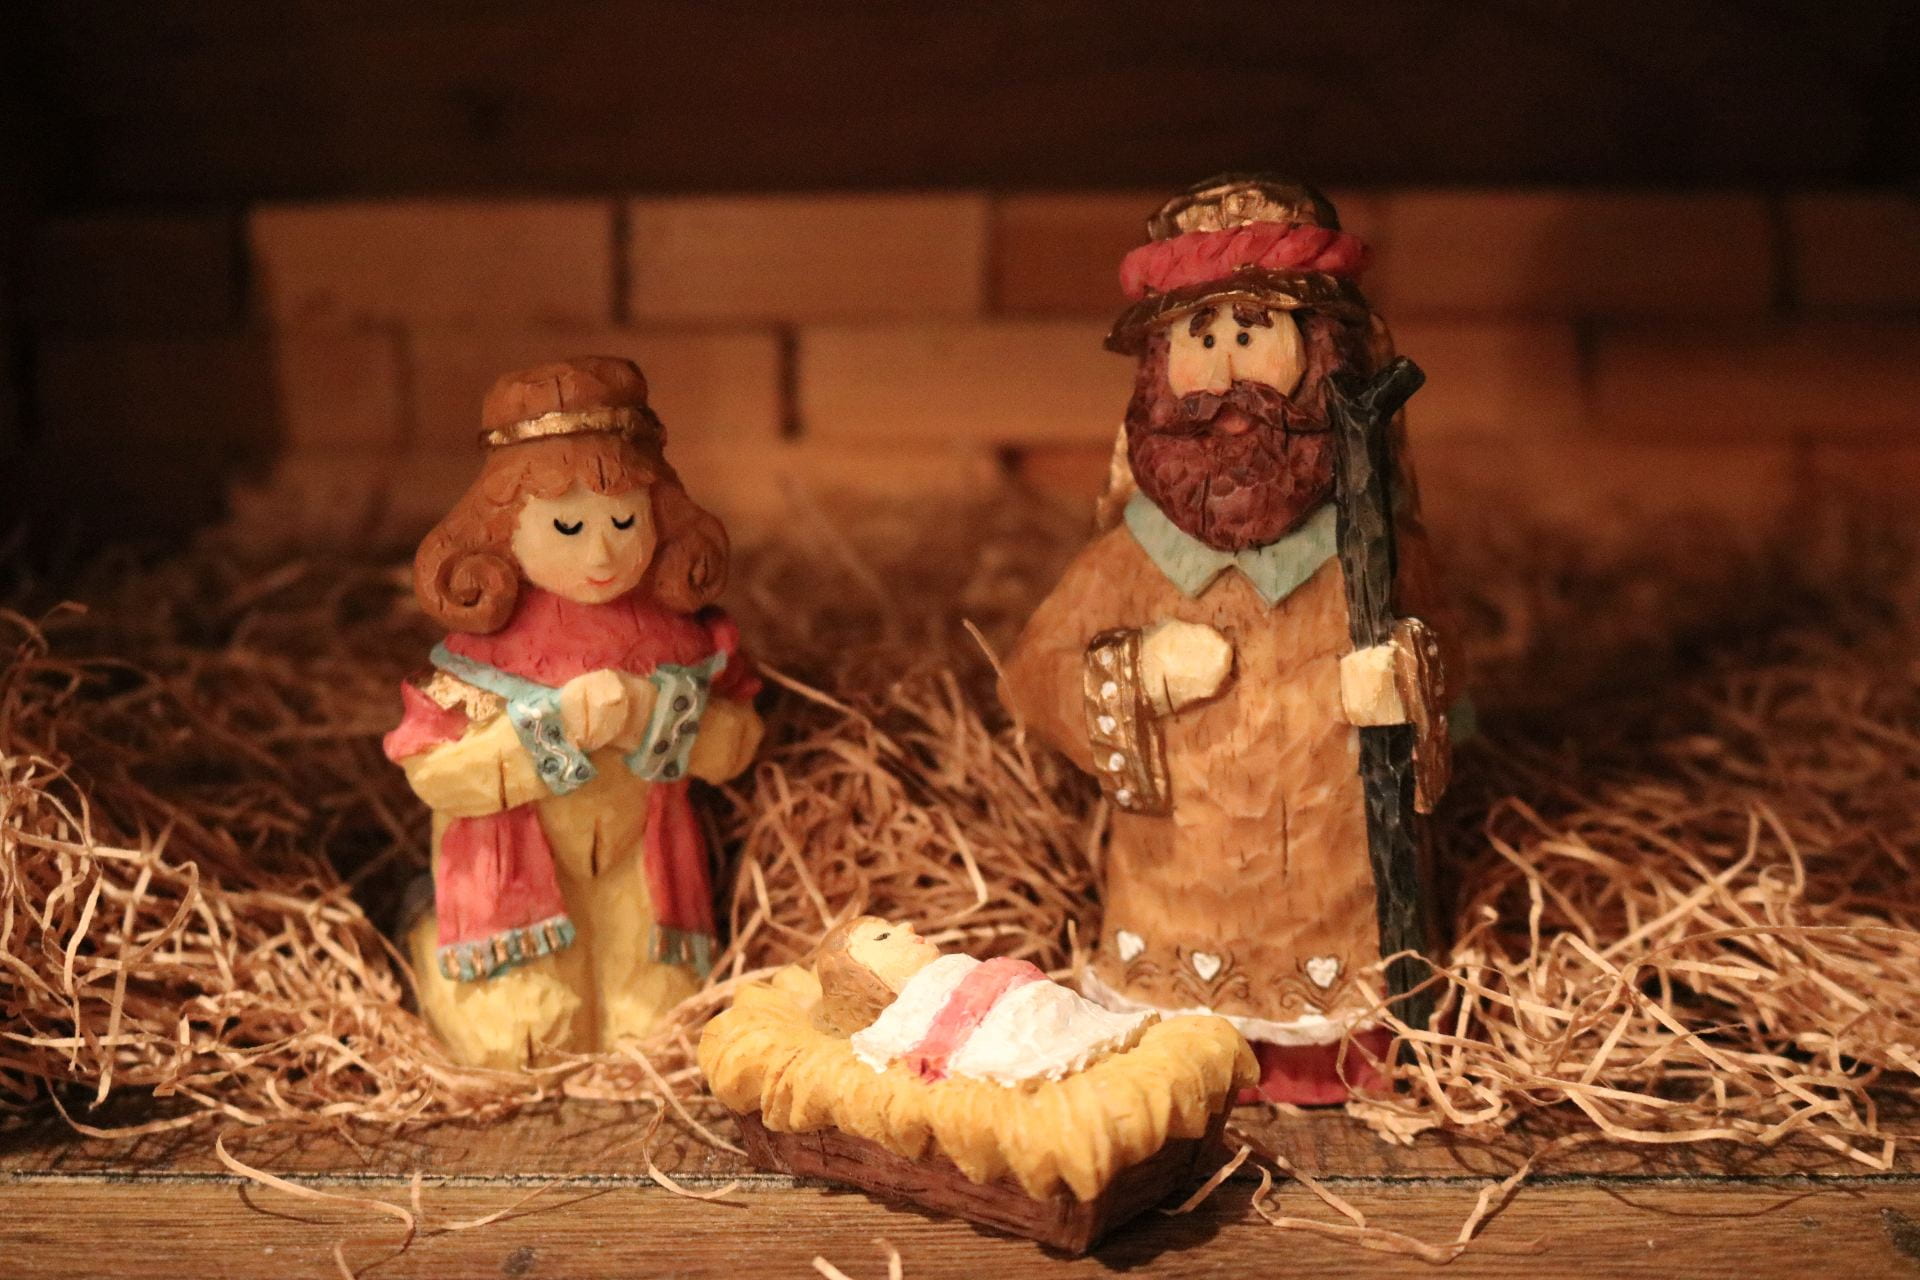 A colorful, carved nativity featuring Mary, Joseph, and Jesus.